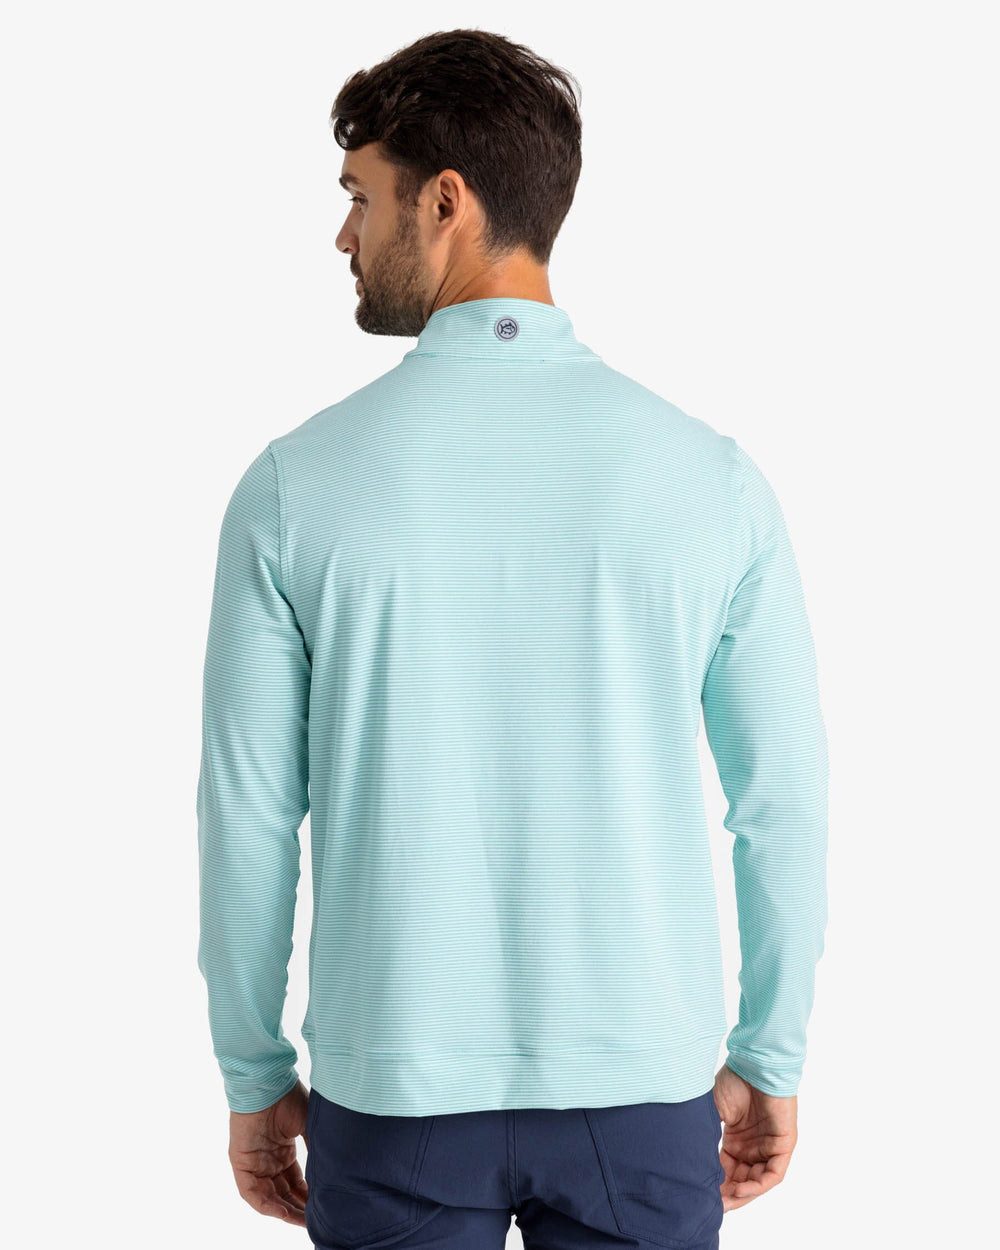 The back view of the Southern Tide Cruiser Heather Micro-Stripe Performance Quarter Zip by Southern Tide - Heather Tidal Wave